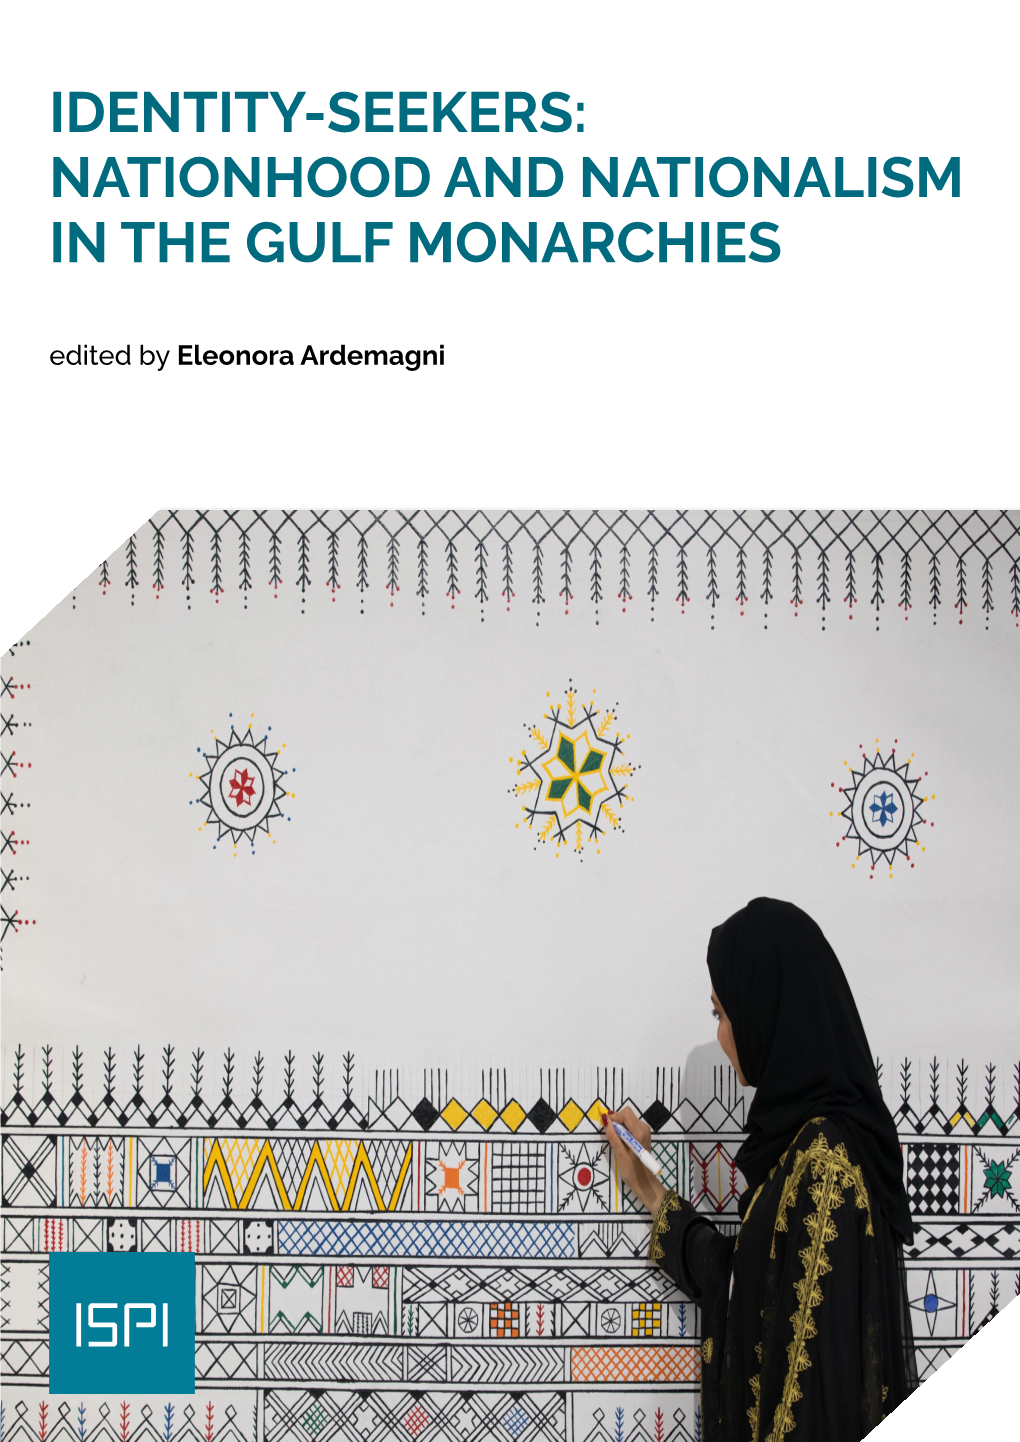 NATIONHOOD and NATIONALISM in the GULF MONARCHIES Edited by Eleonora Ardemagni DOSSIER 16.05.2019 ITALIAN INSTITUTE for INTERNATIONAL POLITICAL STUDIES